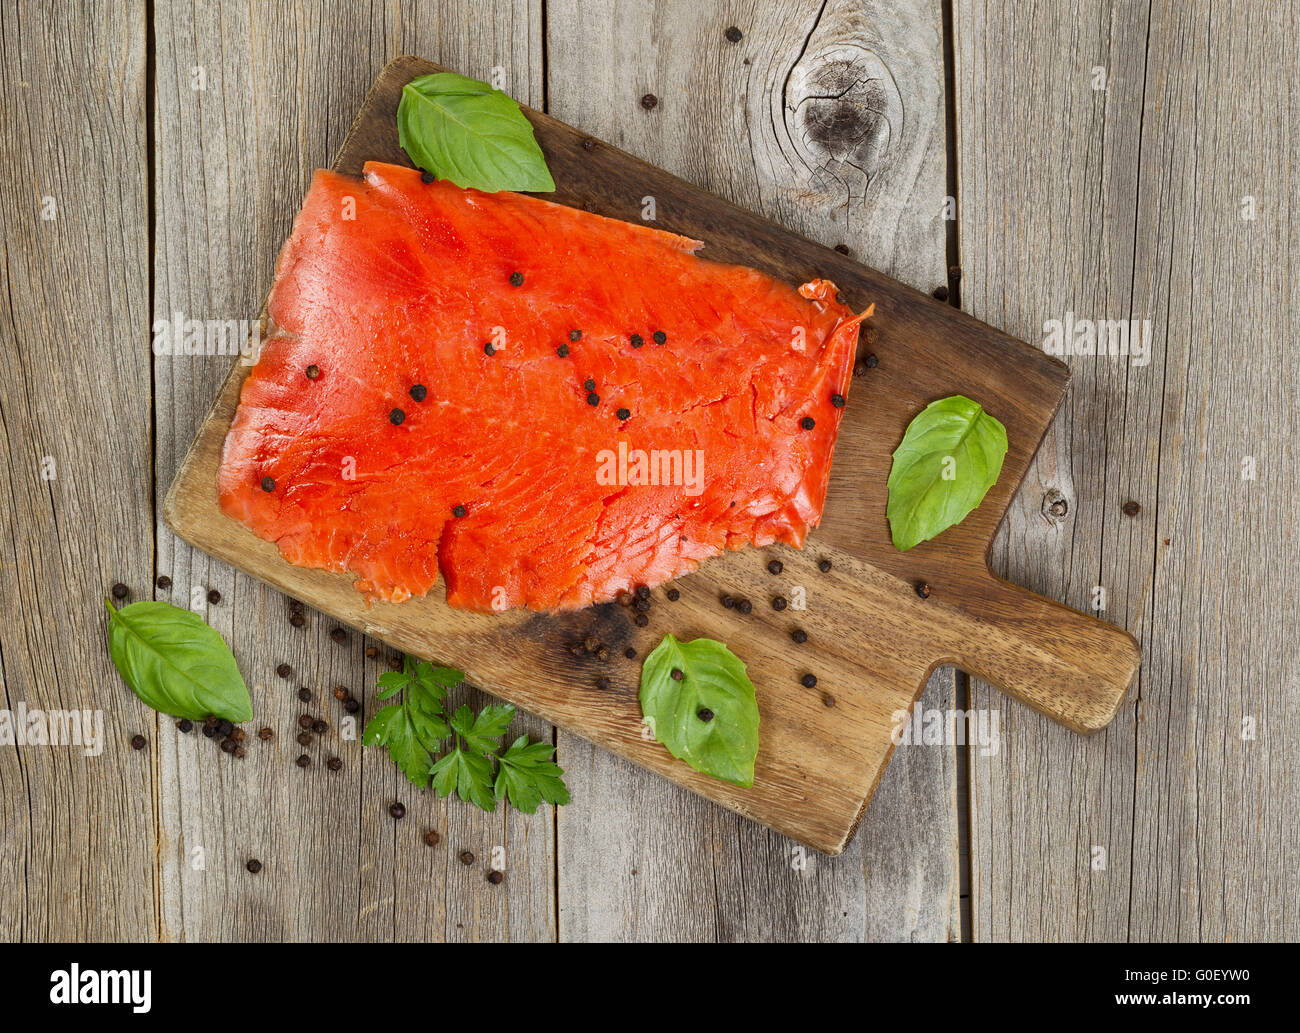 Cold smoke red salmon being prepared on wooden server board Stock Photo